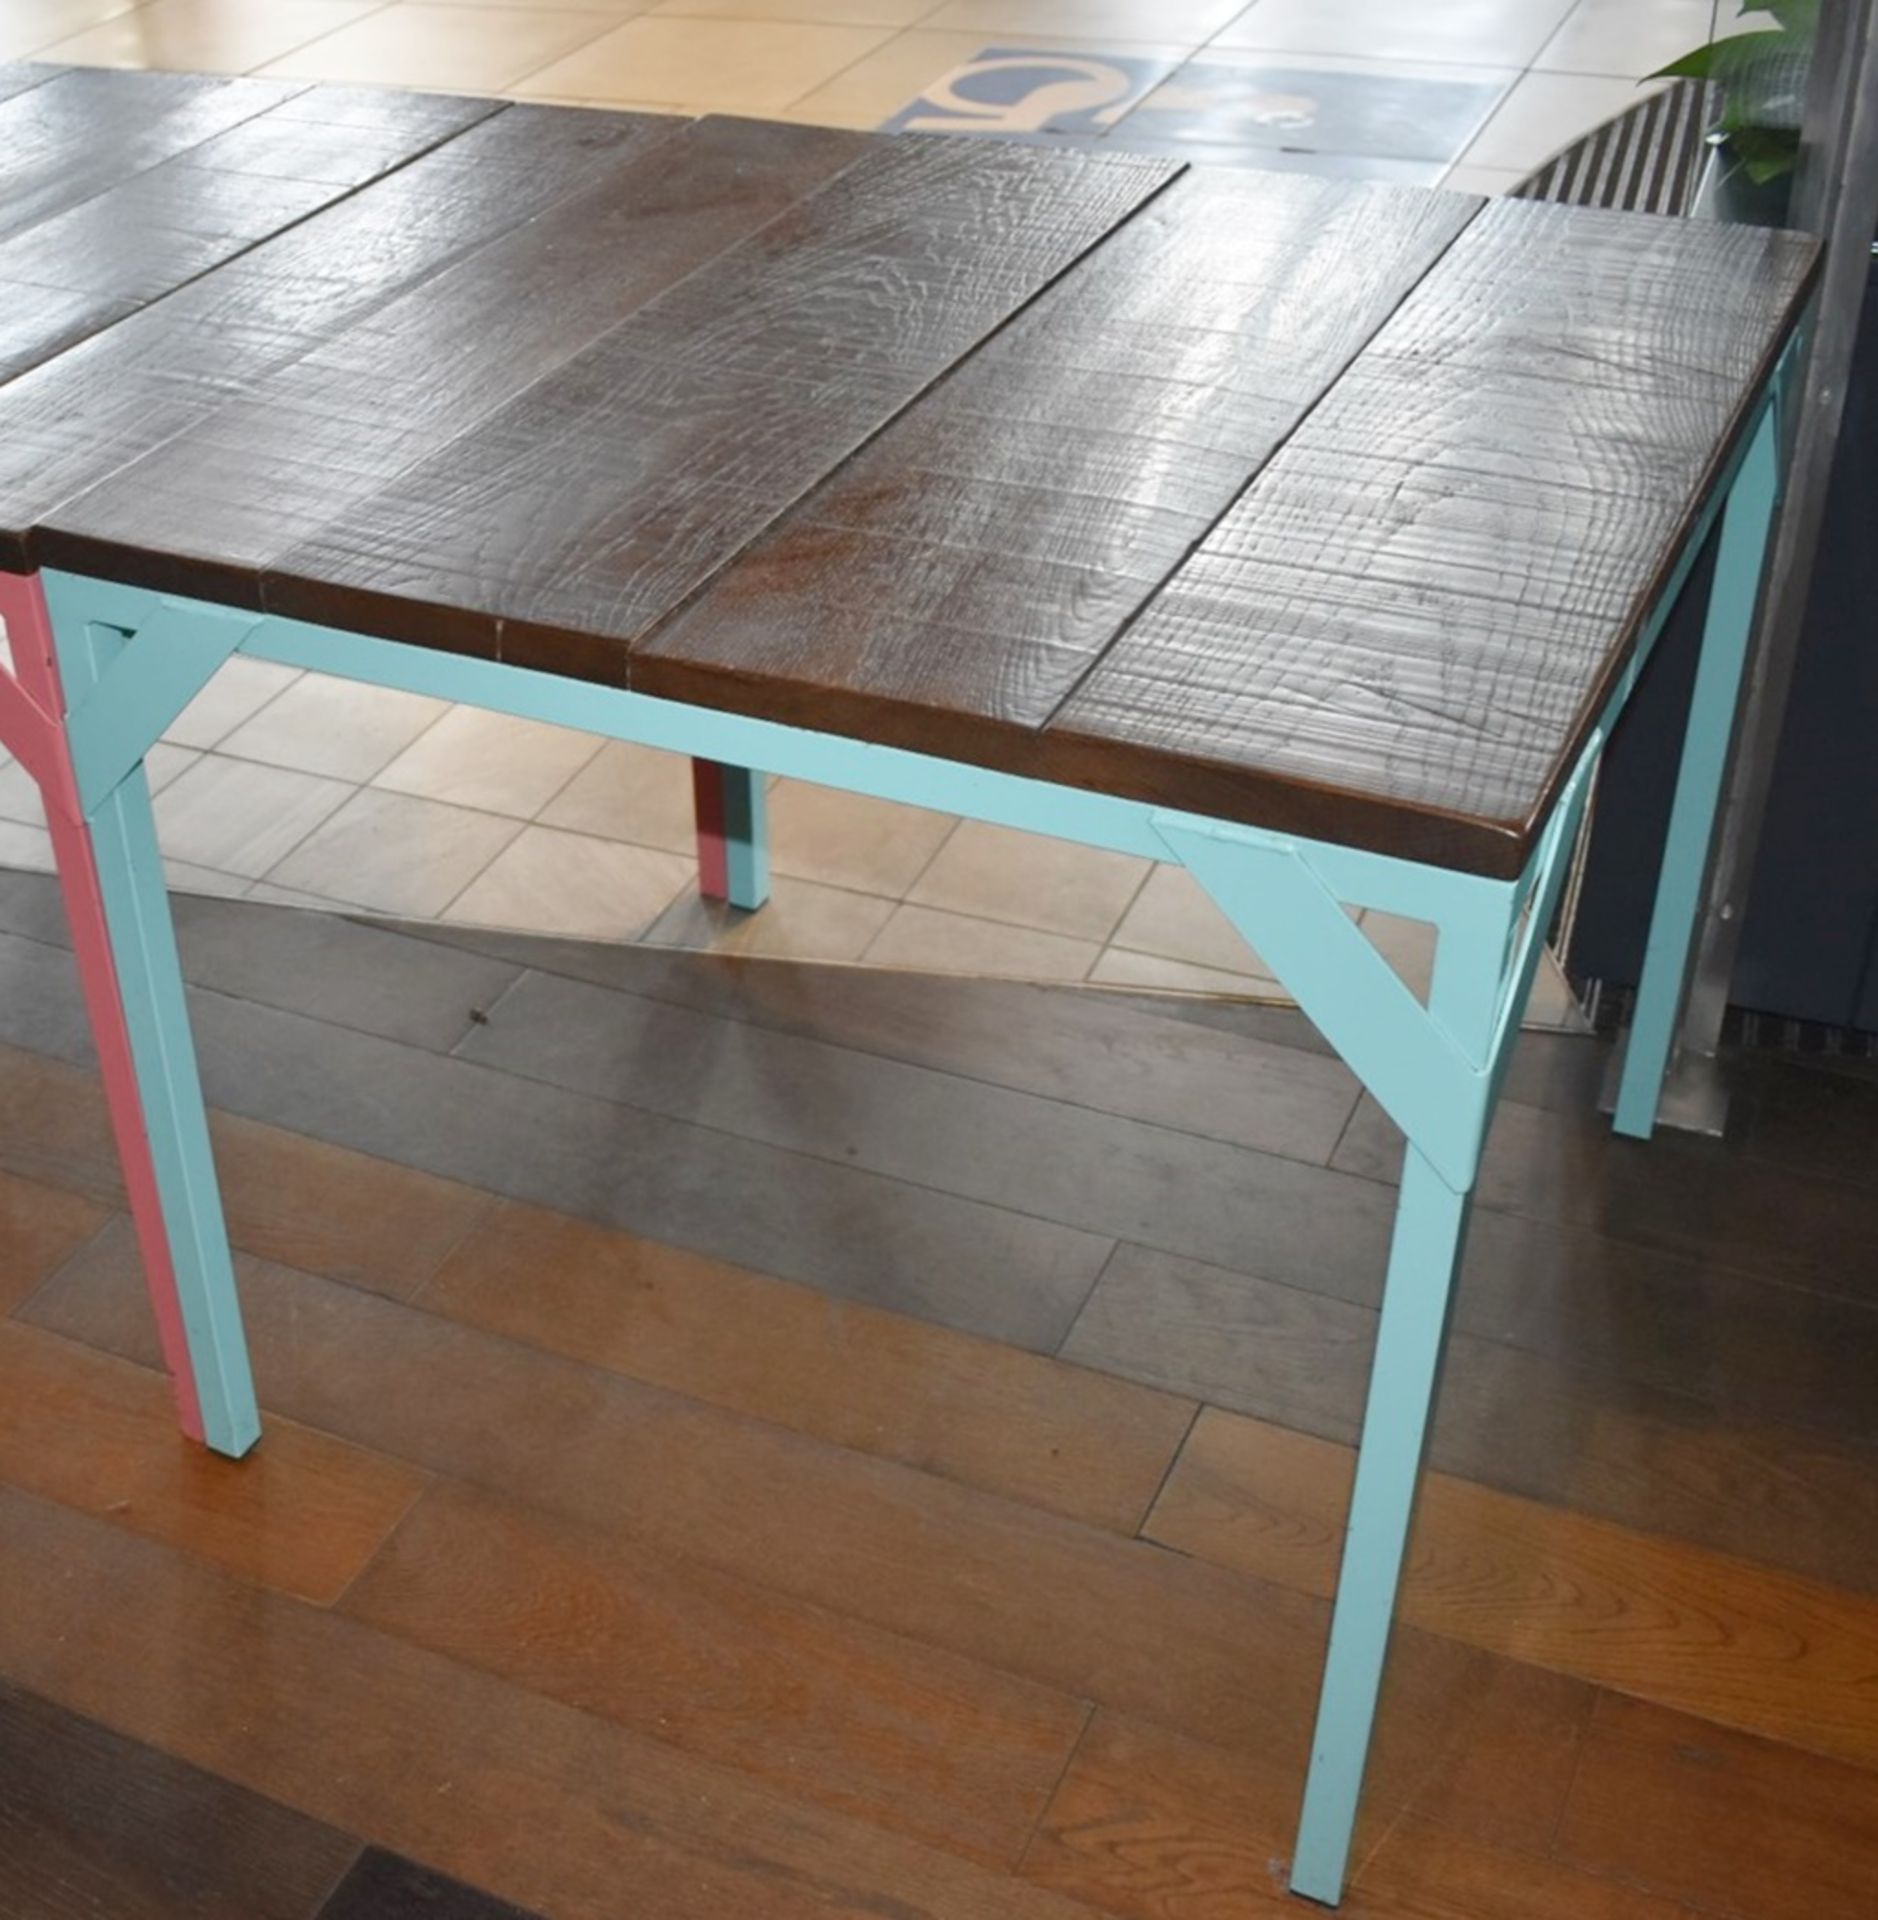 2 x Dining Tables With Duck Egg Blue Steel Bases and Wooden Panelled Tops - Size: H77  W85 x D85 cms